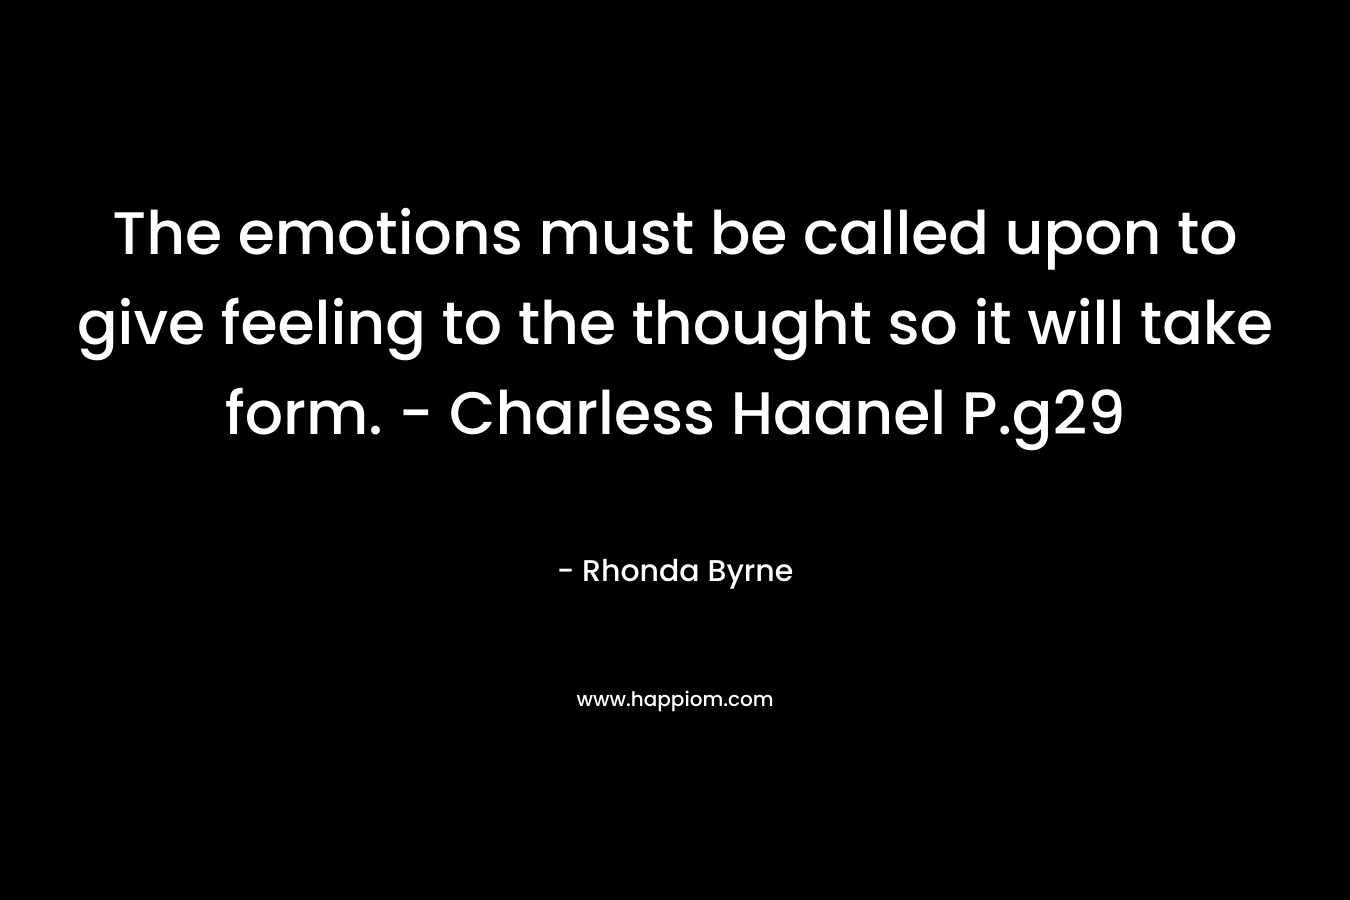 The emotions must be called upon to give feeling to the thought so it will take form. - Charless Haanel P.g29